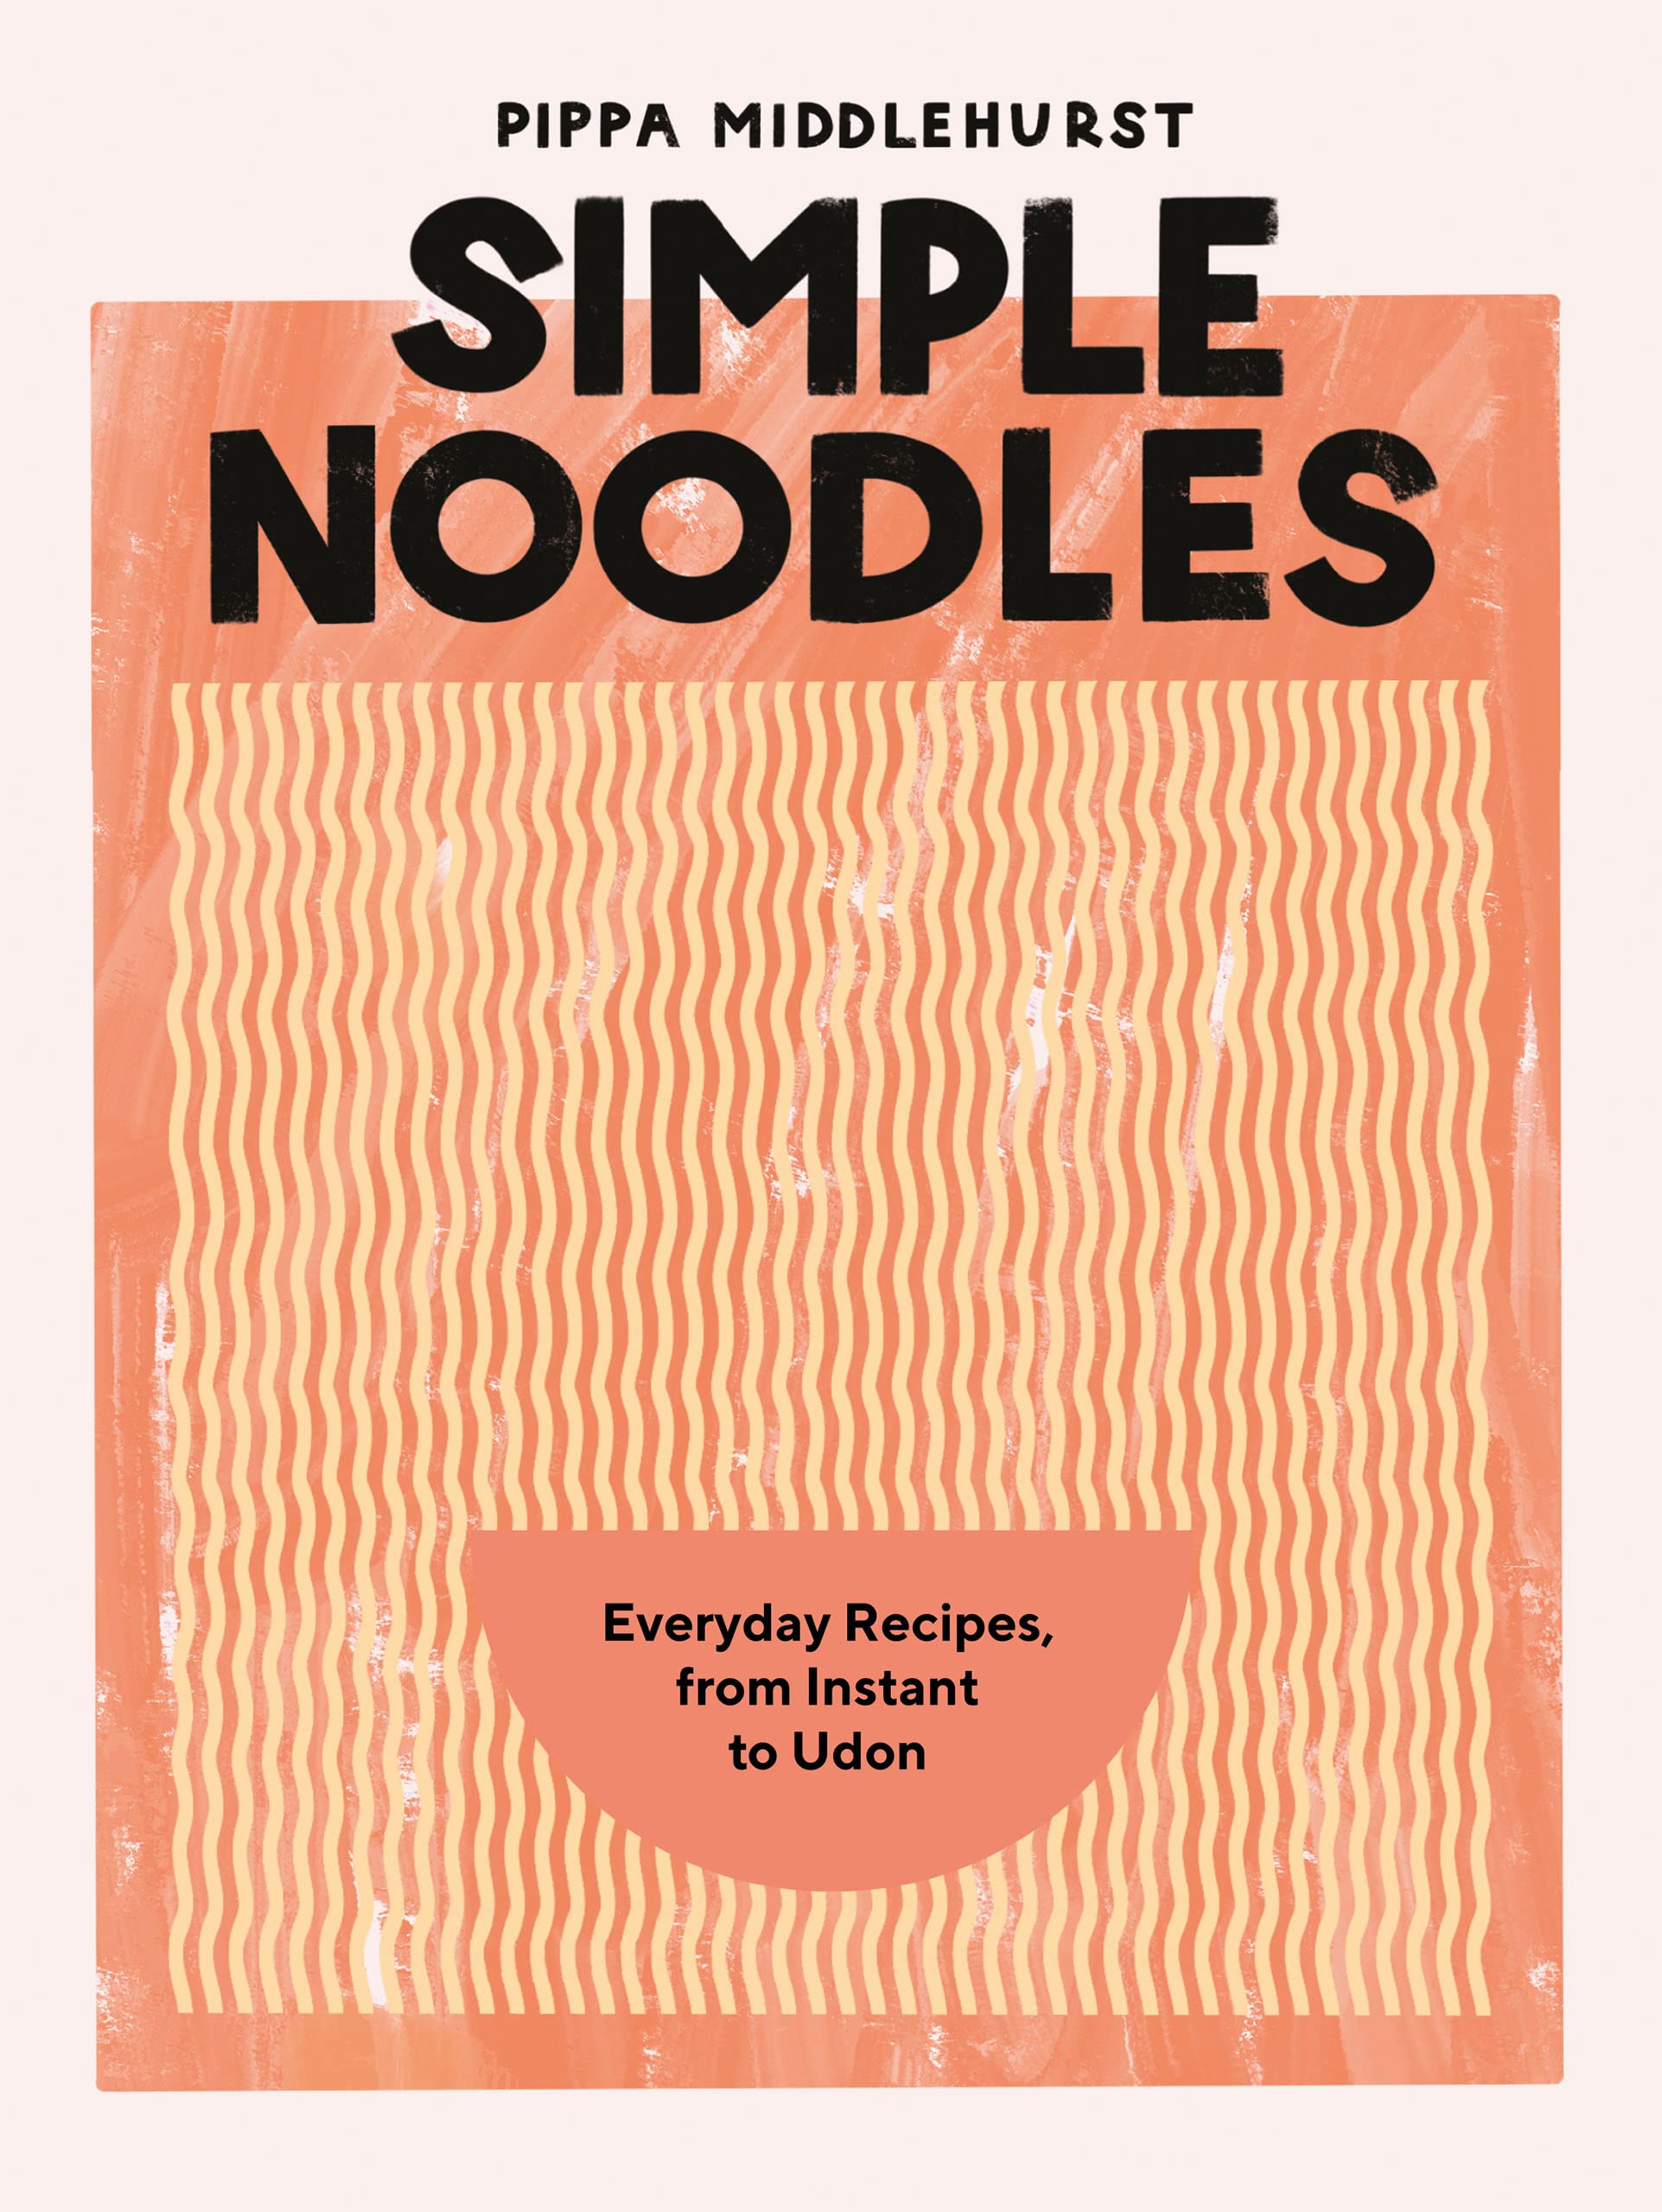 Simple Noodles: Everyday Recipes, from Instant to Udon (Pippa Middlehurst)